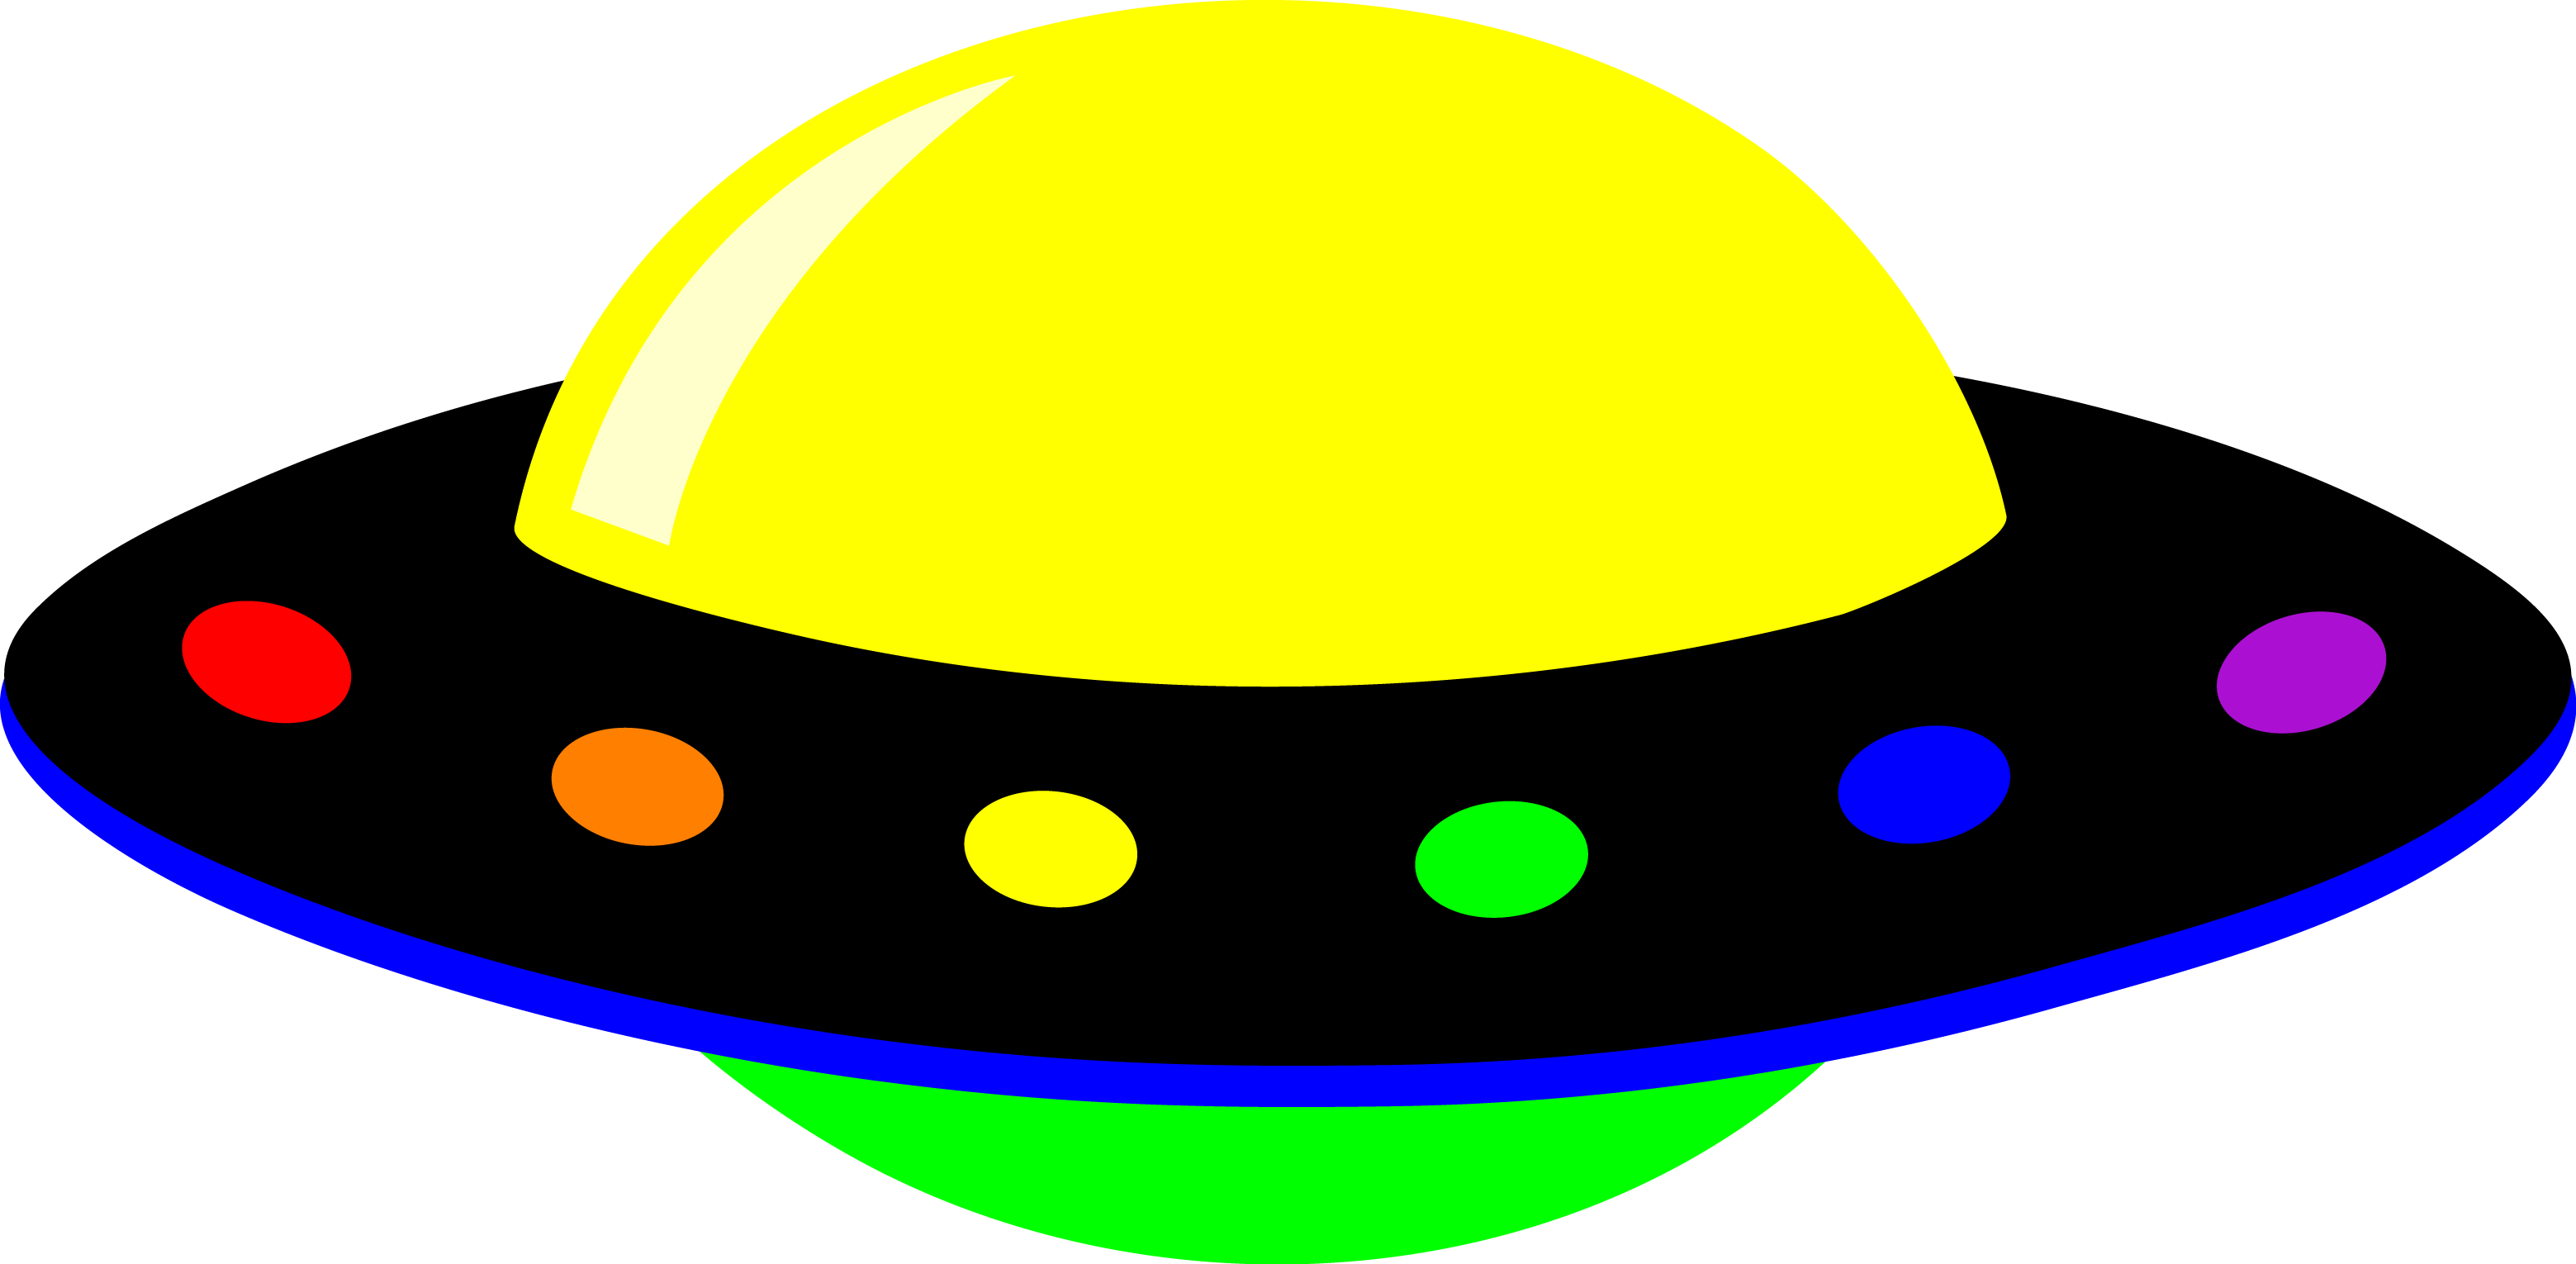 spaceship-clipart-BdTry9Xi9 (1) - Western New Mexico University